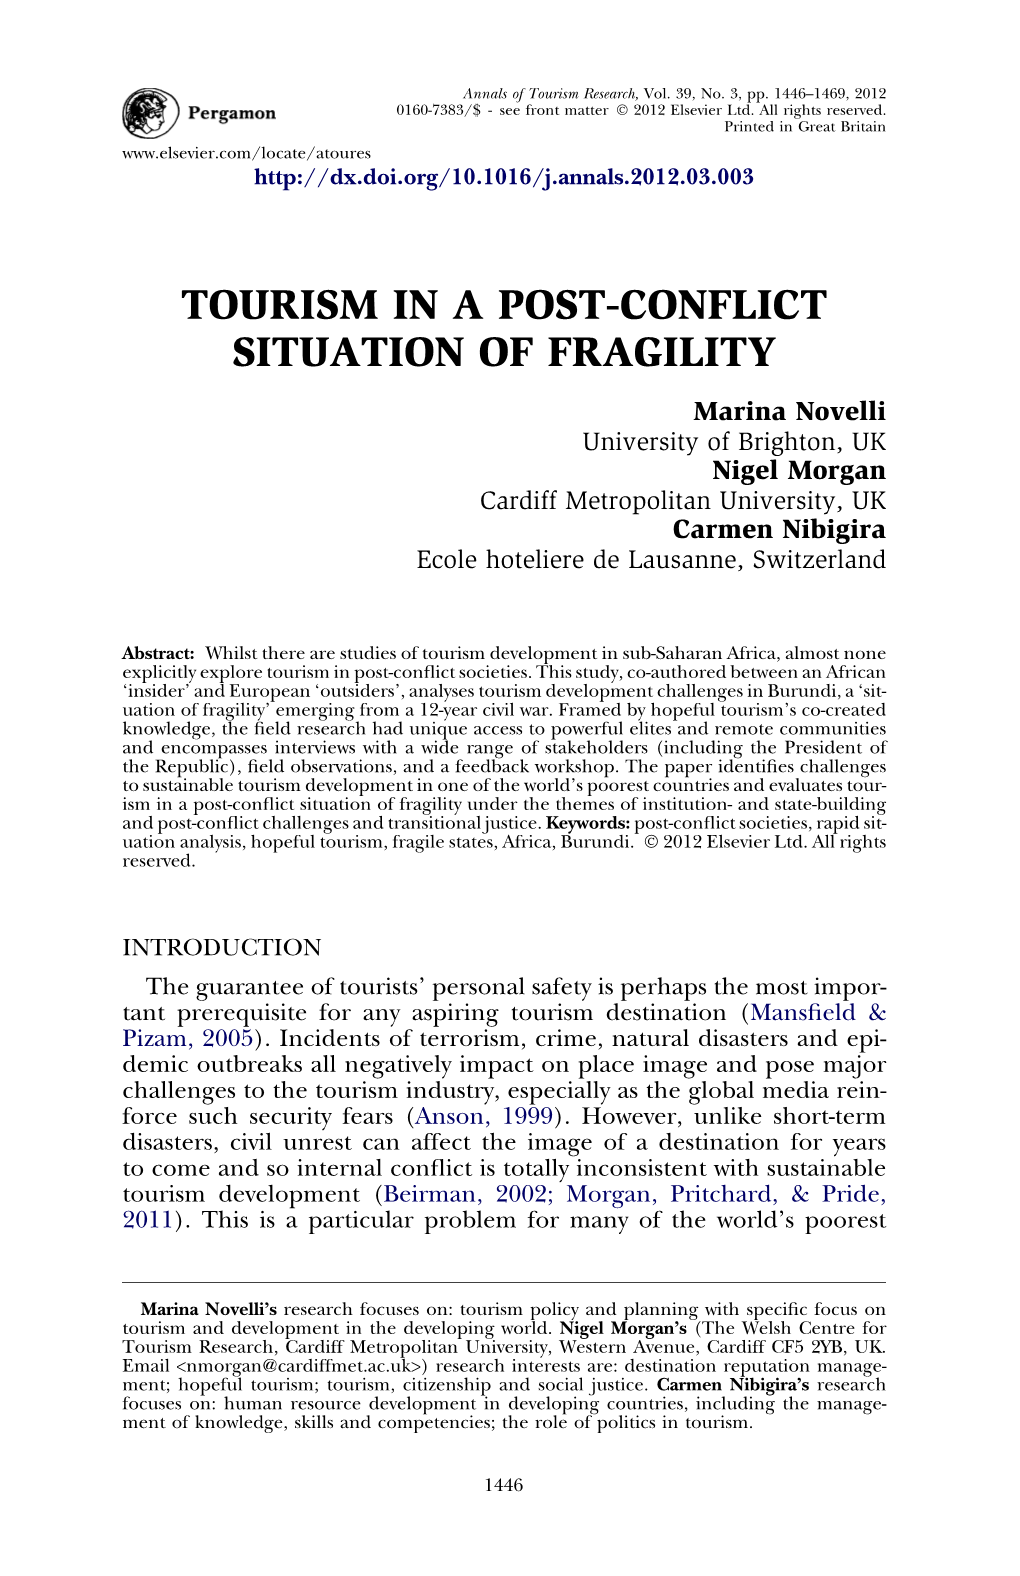 Tourism in a Post-Conflict Situation of Fragility